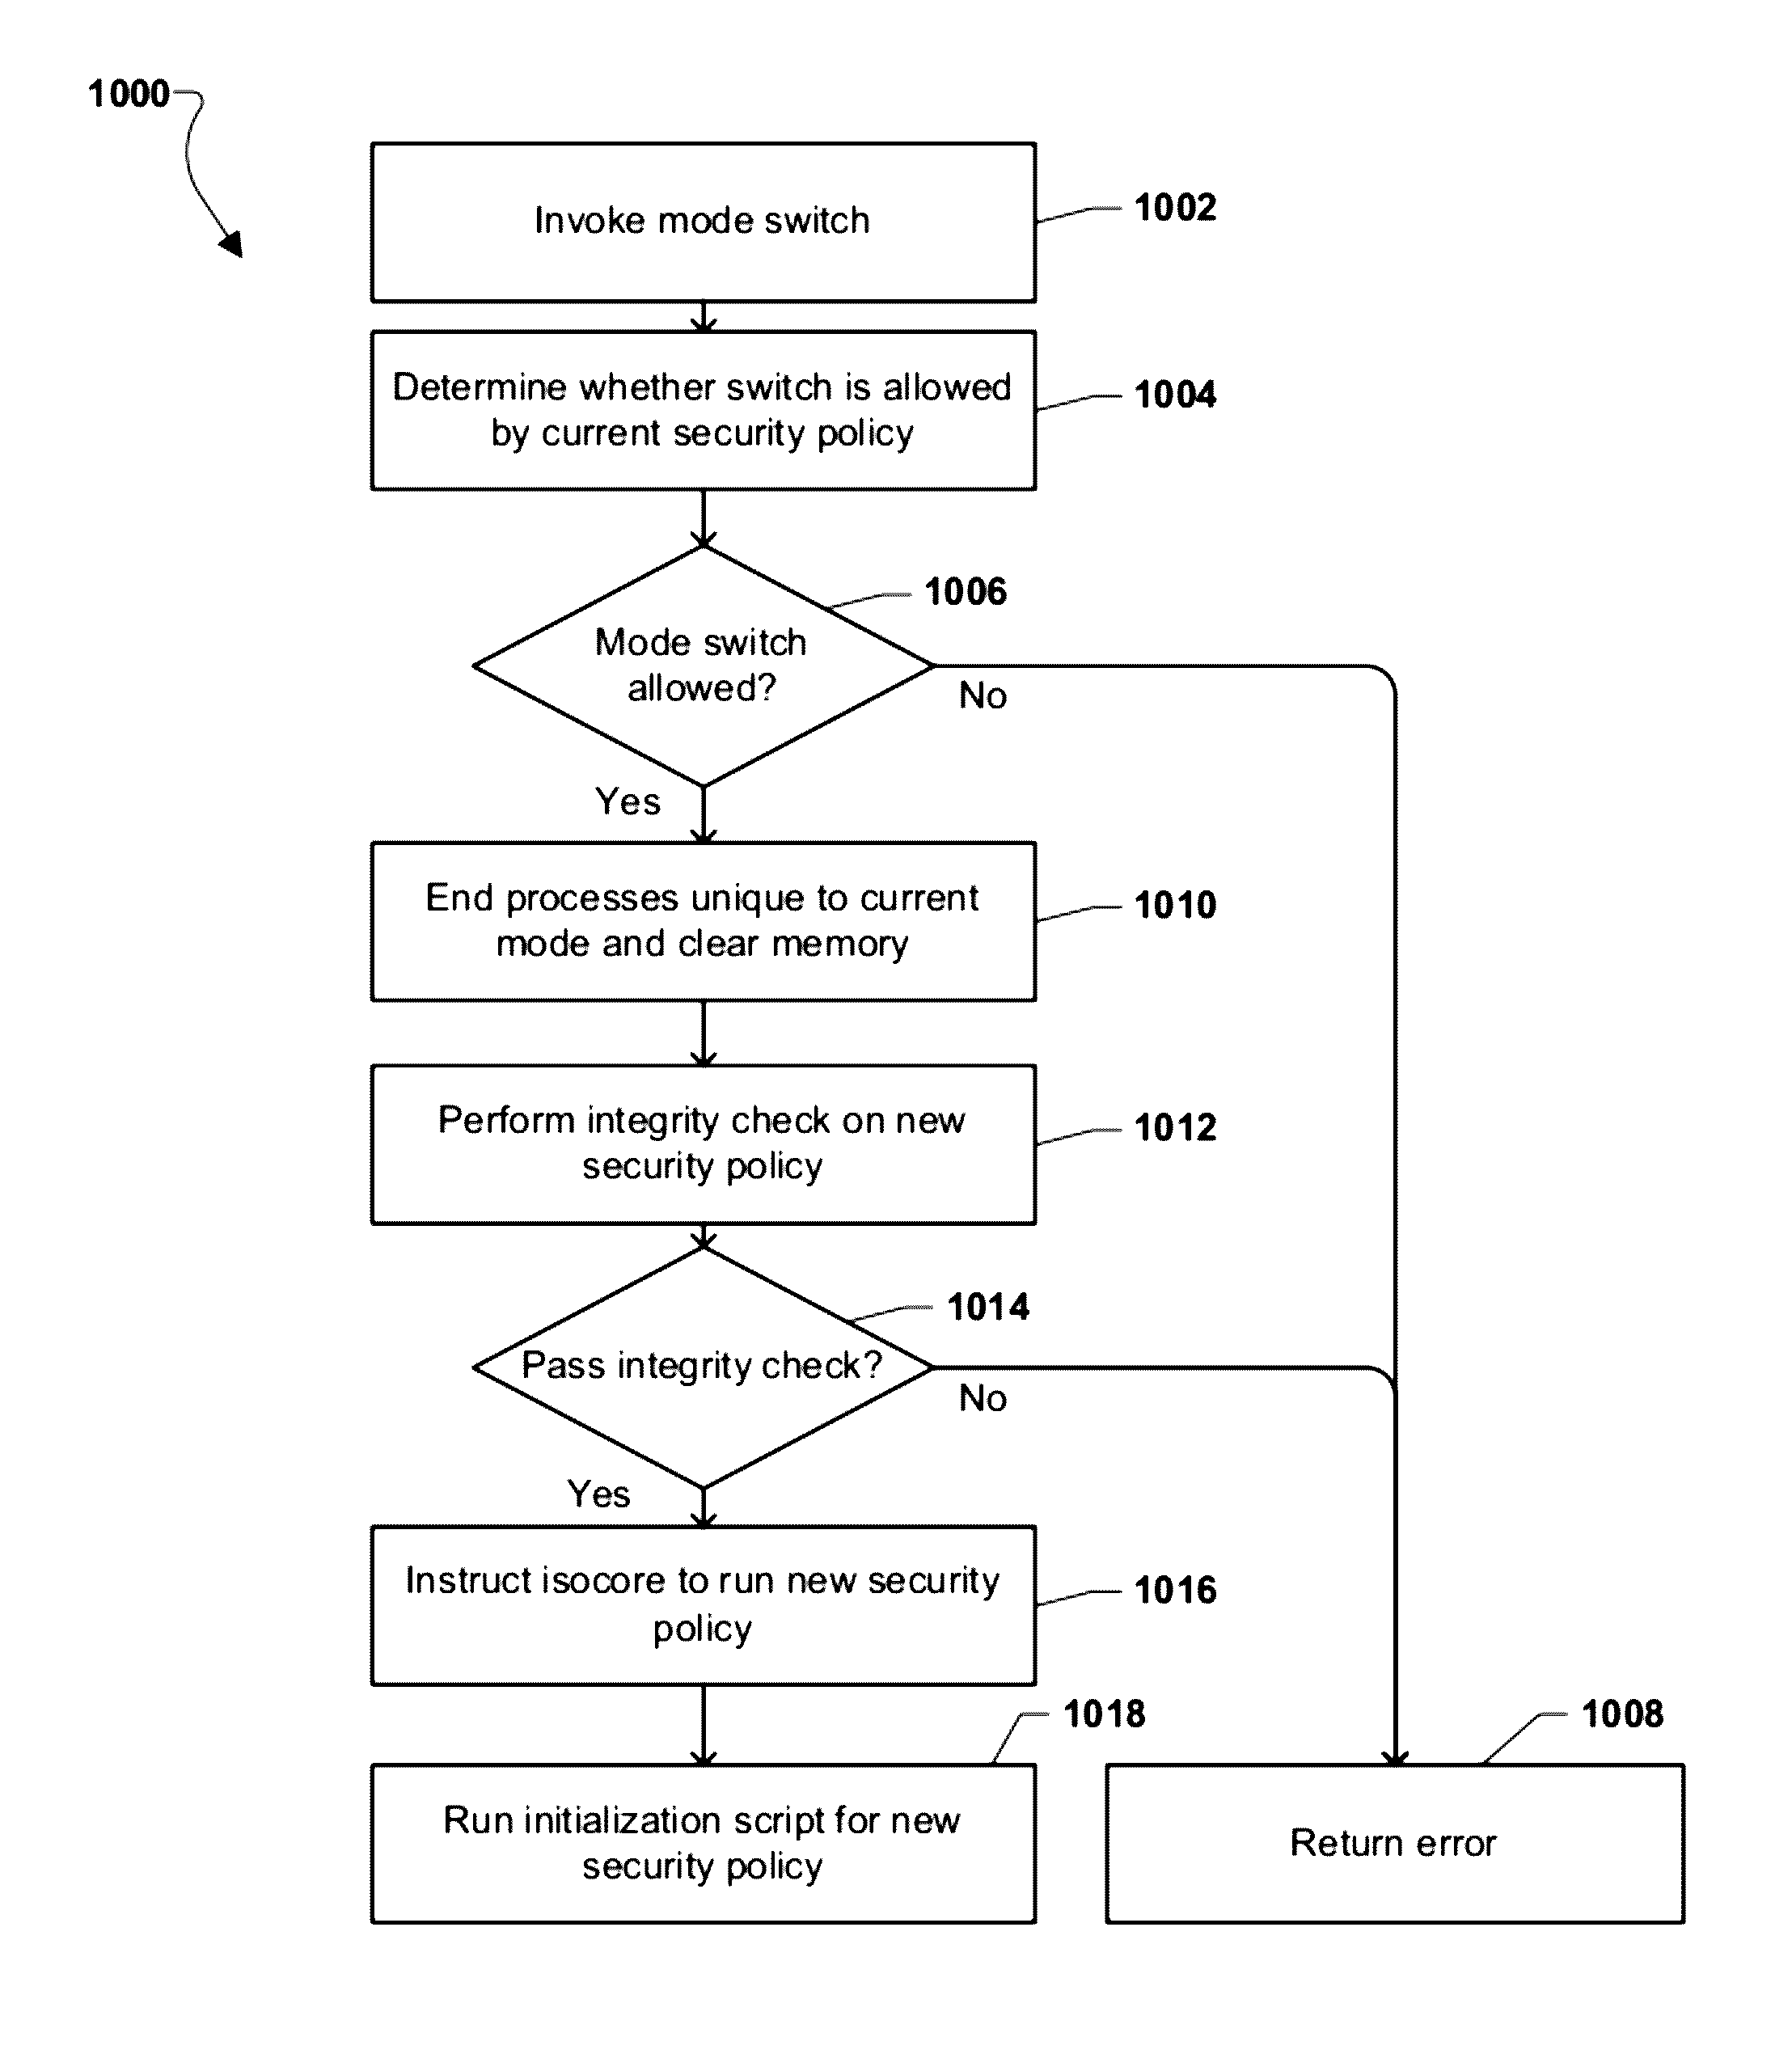 Systems and methods for enhanced security in wireless communication